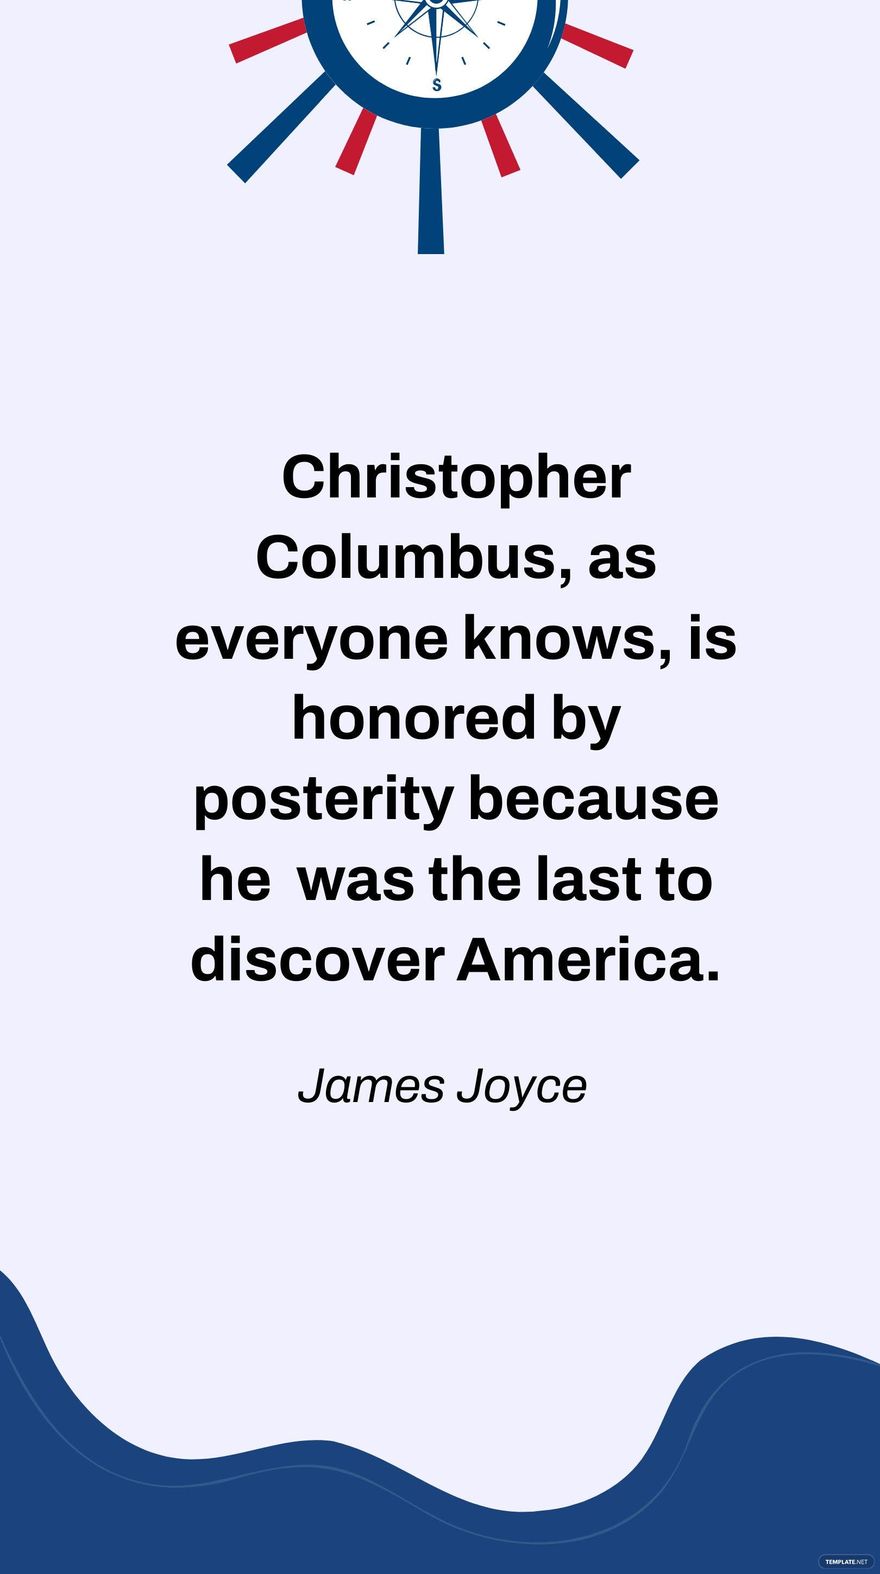 James Joyce- Christopher Columbus, as everyone knows, is honored by posterity because he was the last to discover America.